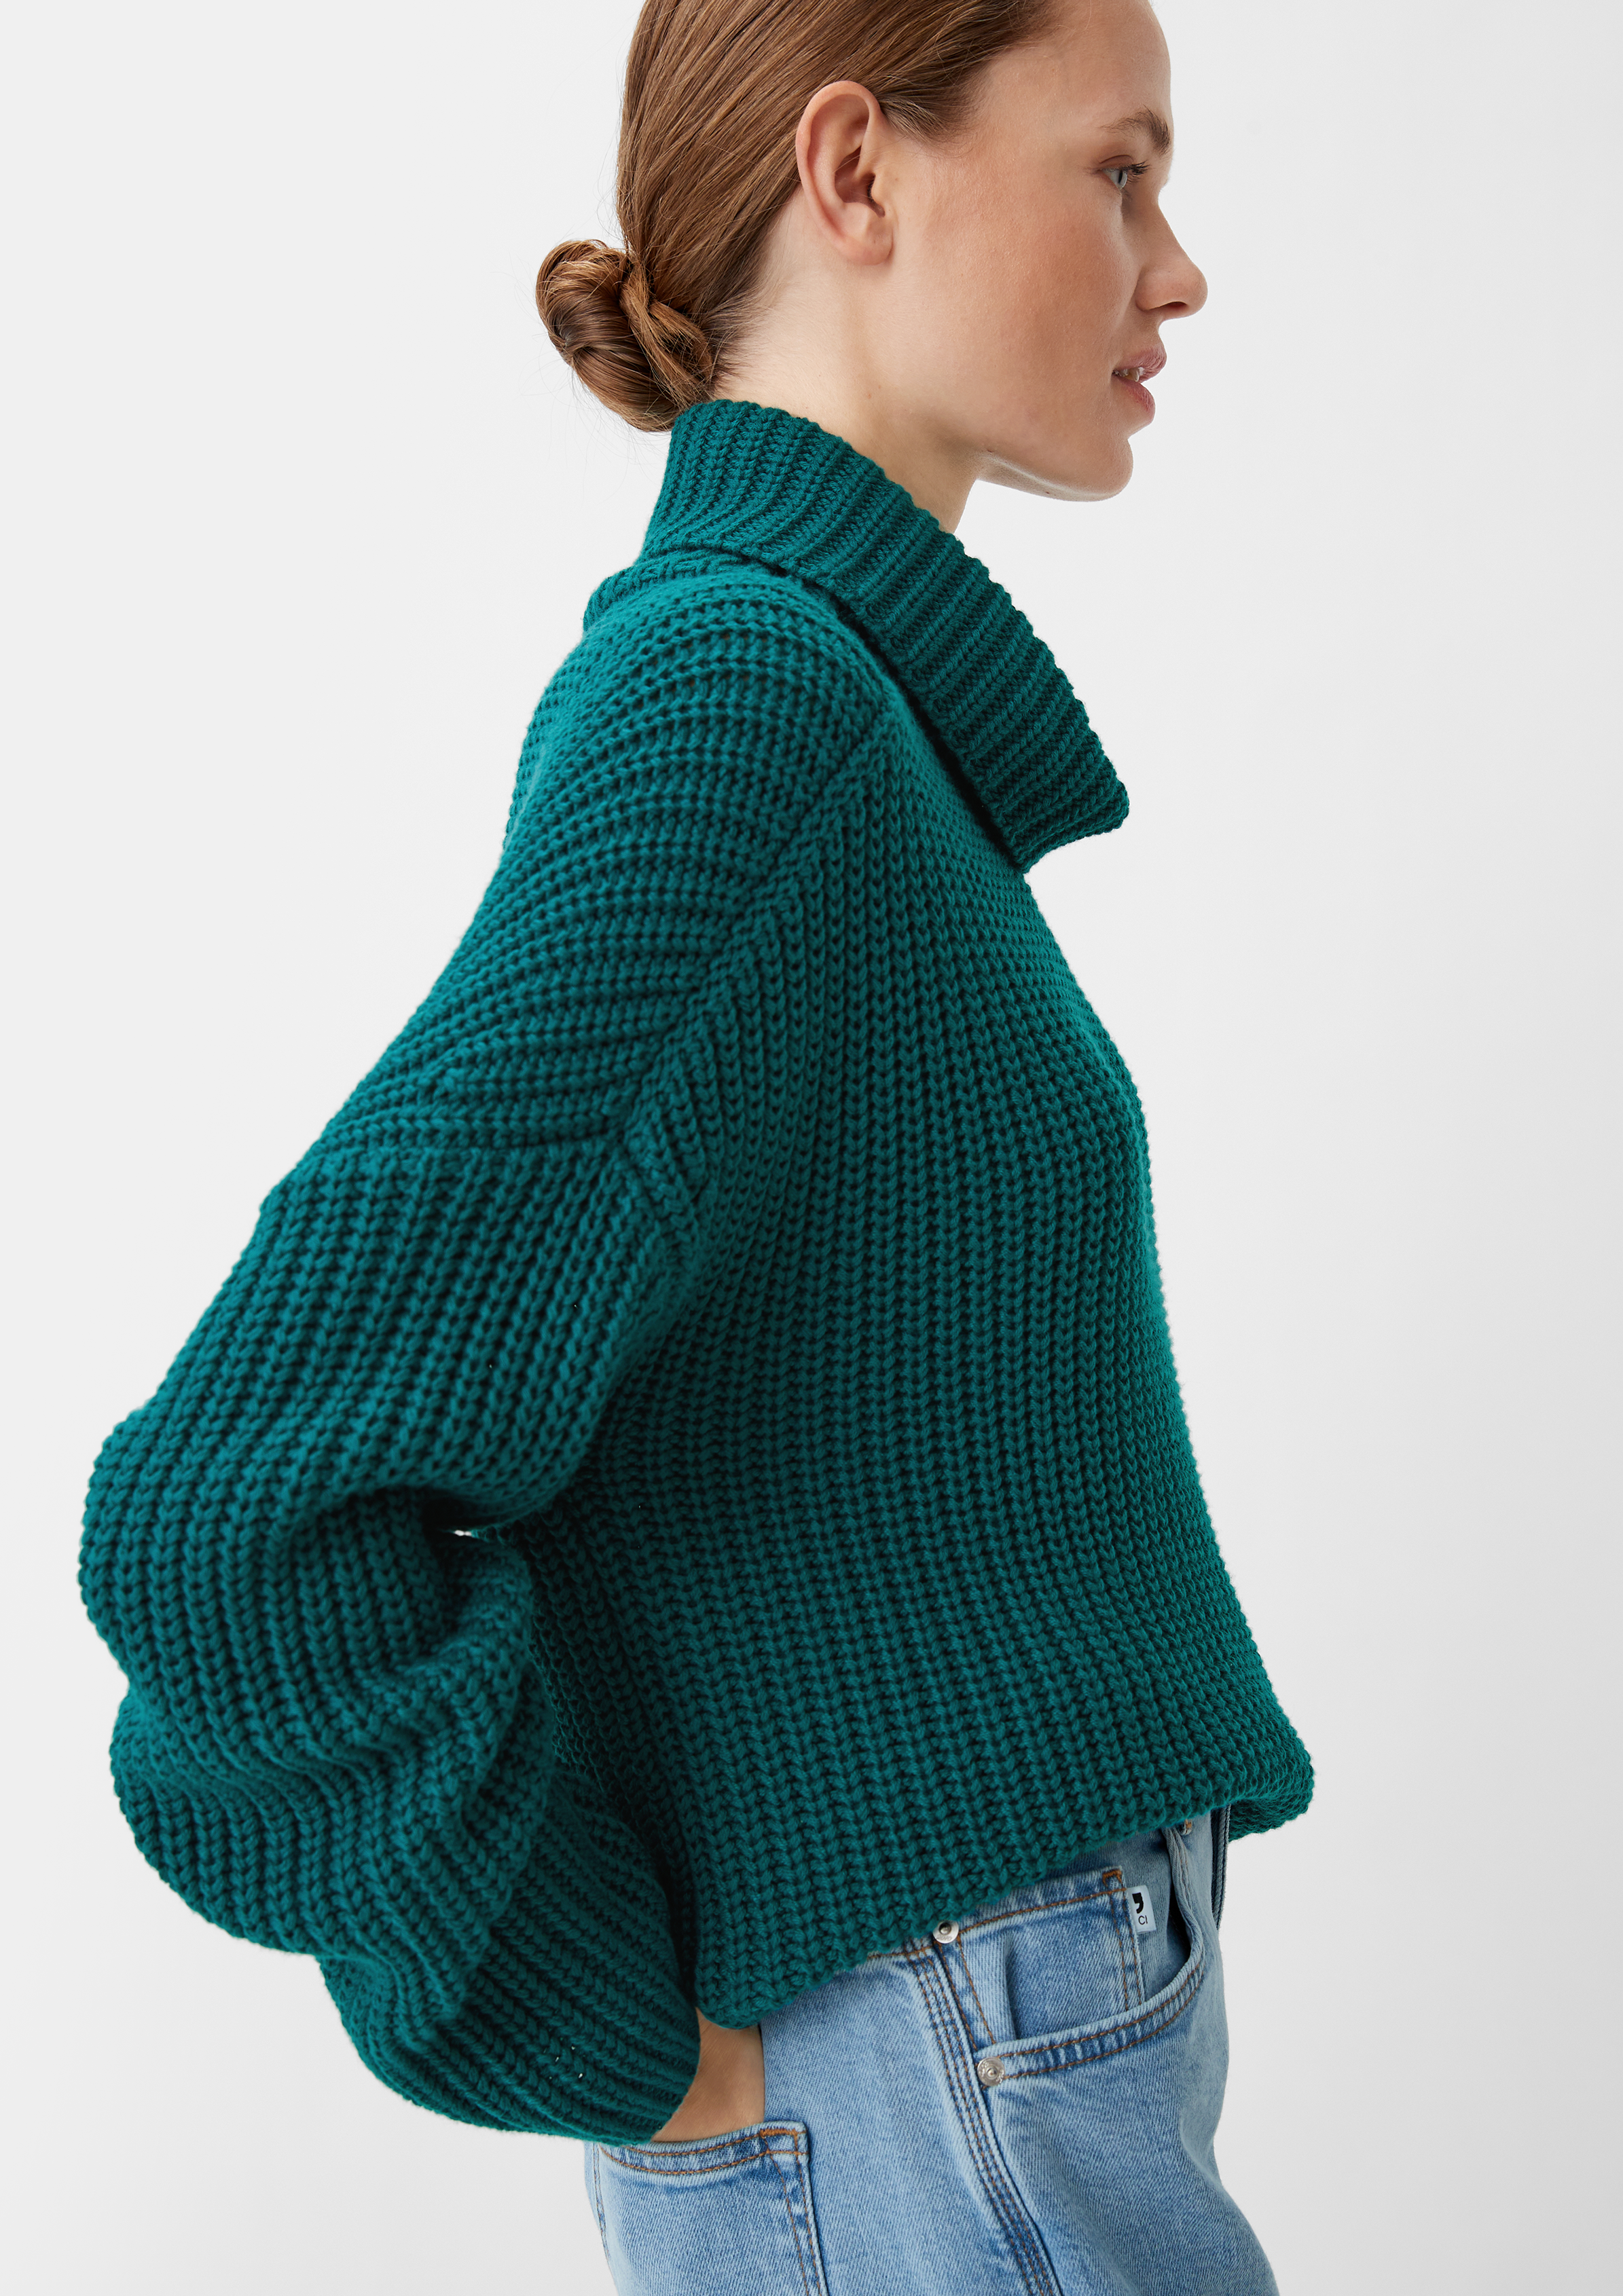 knitted jumper | polo petrol neck Comma a with - Loose-fitting